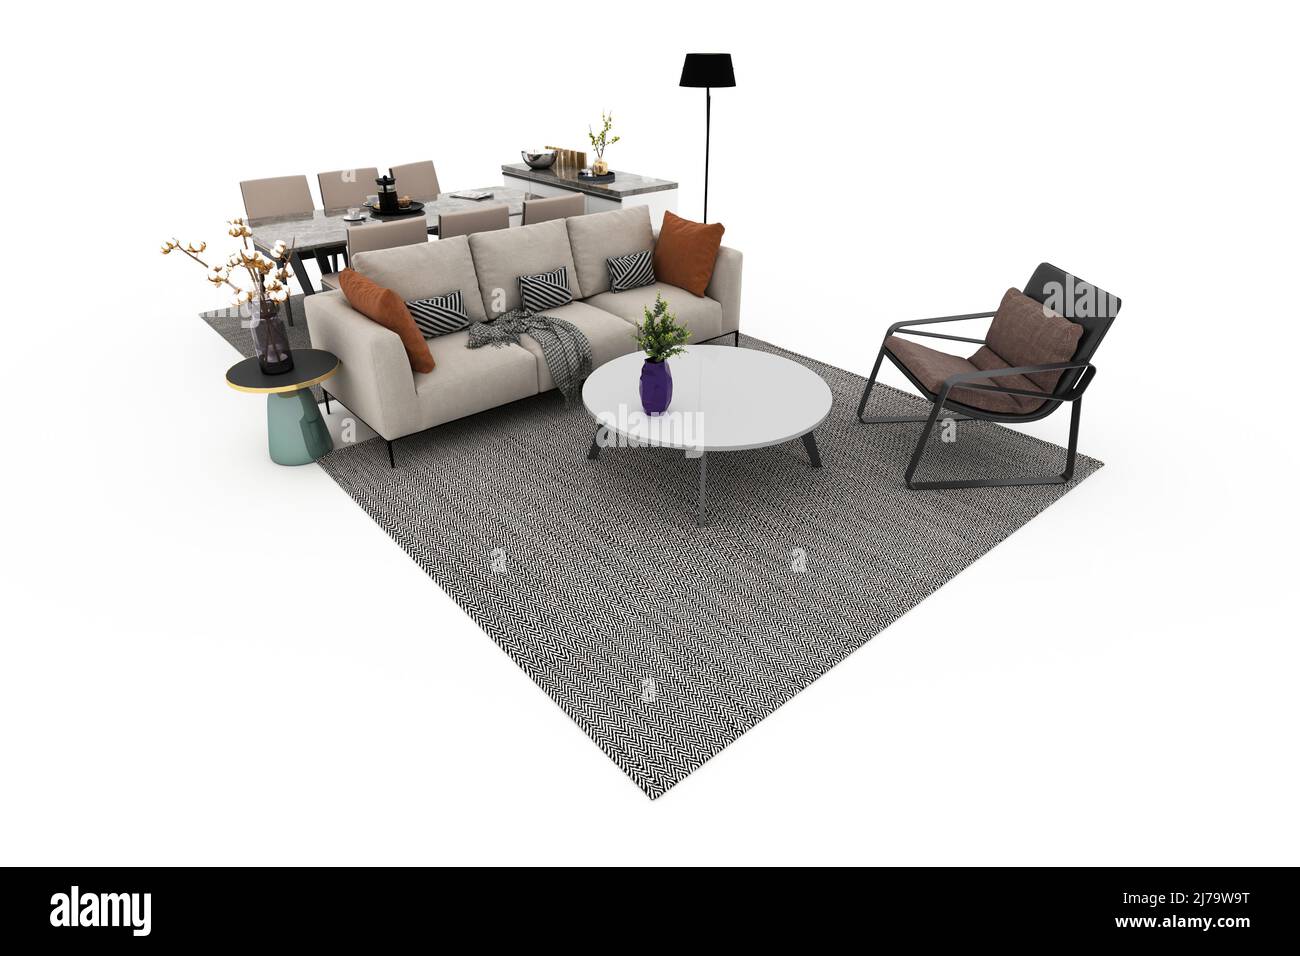 Modern minimalist living room with carpet, sofa, table and chairs. 3D rendering. Stock Photo